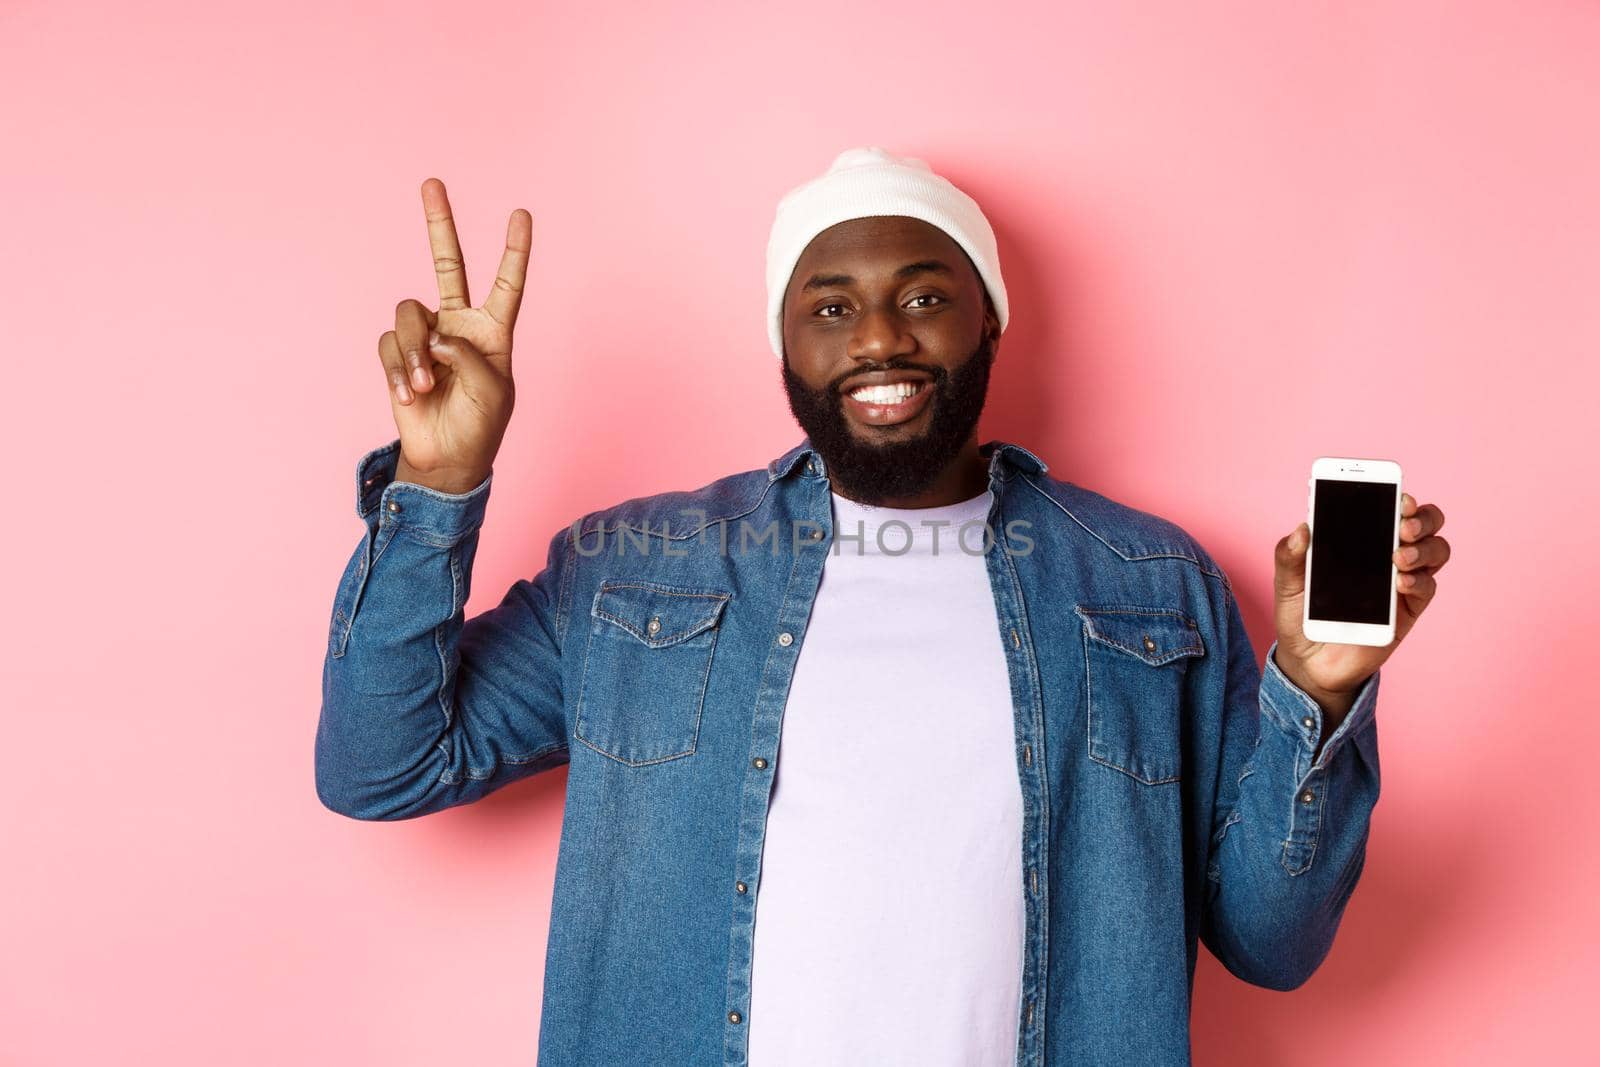 Online shopping and technology concept. Happy Black guy in beanie and denim shirt showing mobile screen and peace sign, standing over pink background.